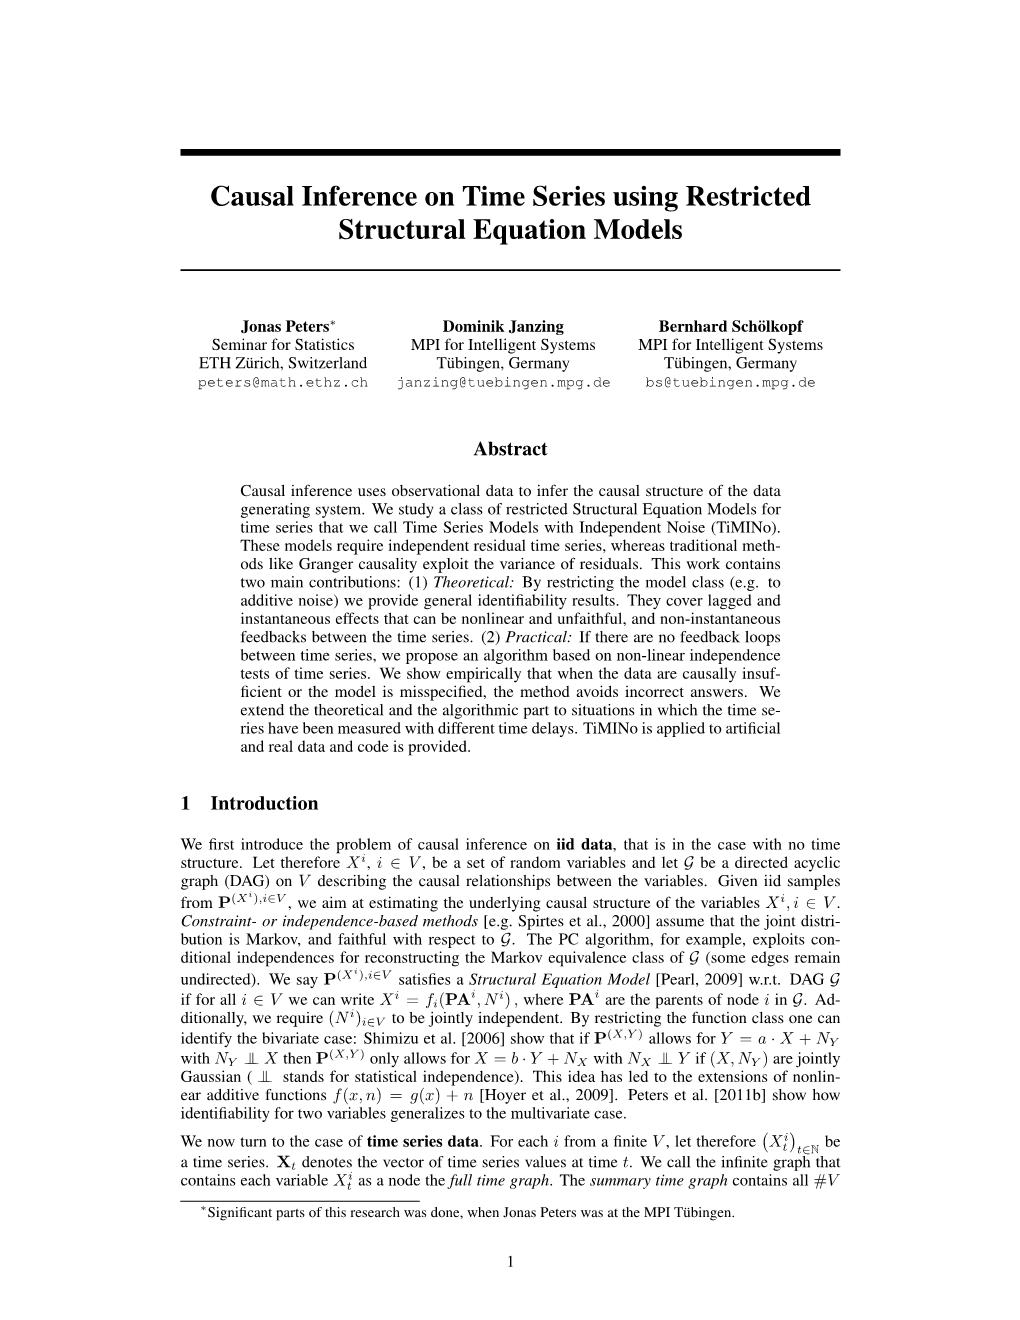 Causal Inference on Time Series Using Restricted Structural Equation Models